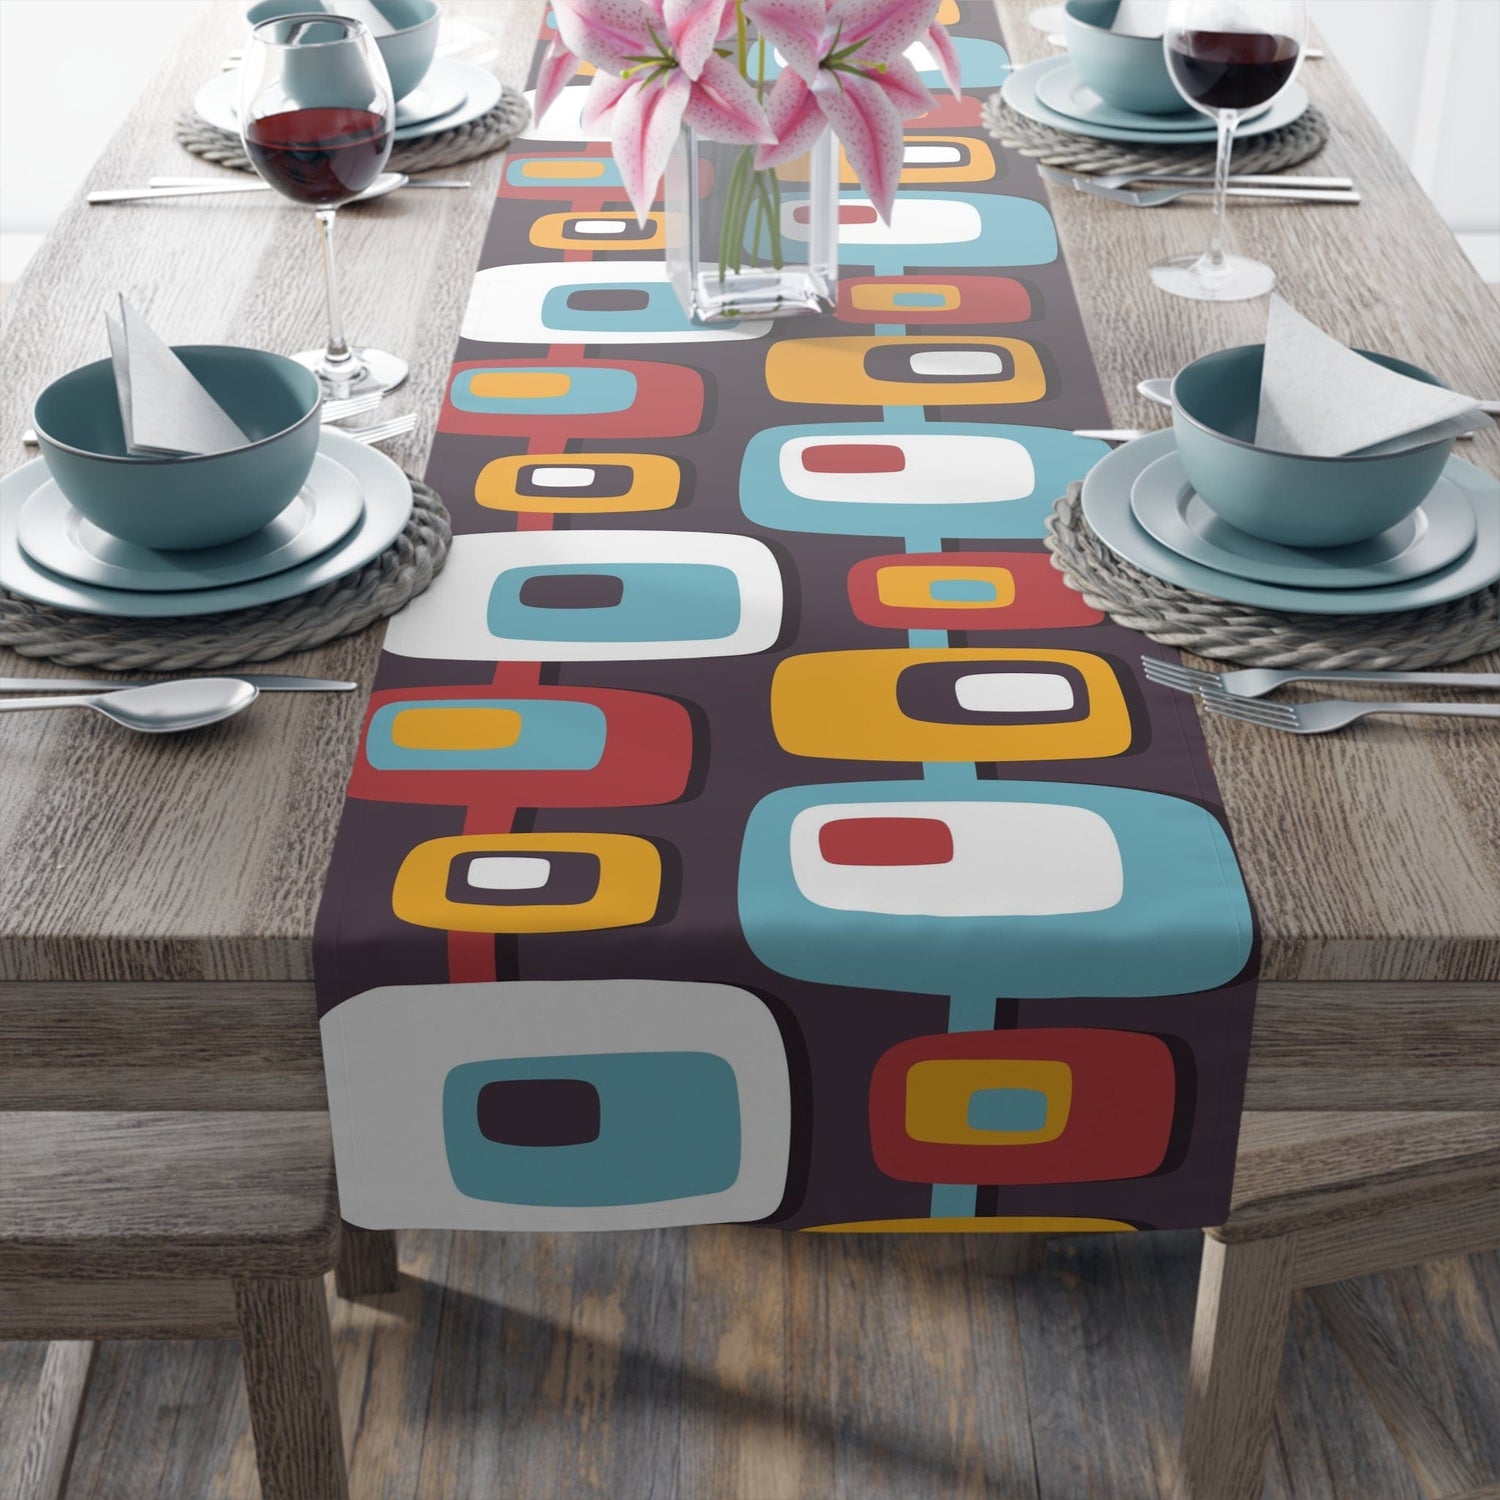 Kate McEnroe New York Mid Century Modern Geometric Abstract Squares Table Runner (Cotton, Poly)Table Runners74415661472004339490